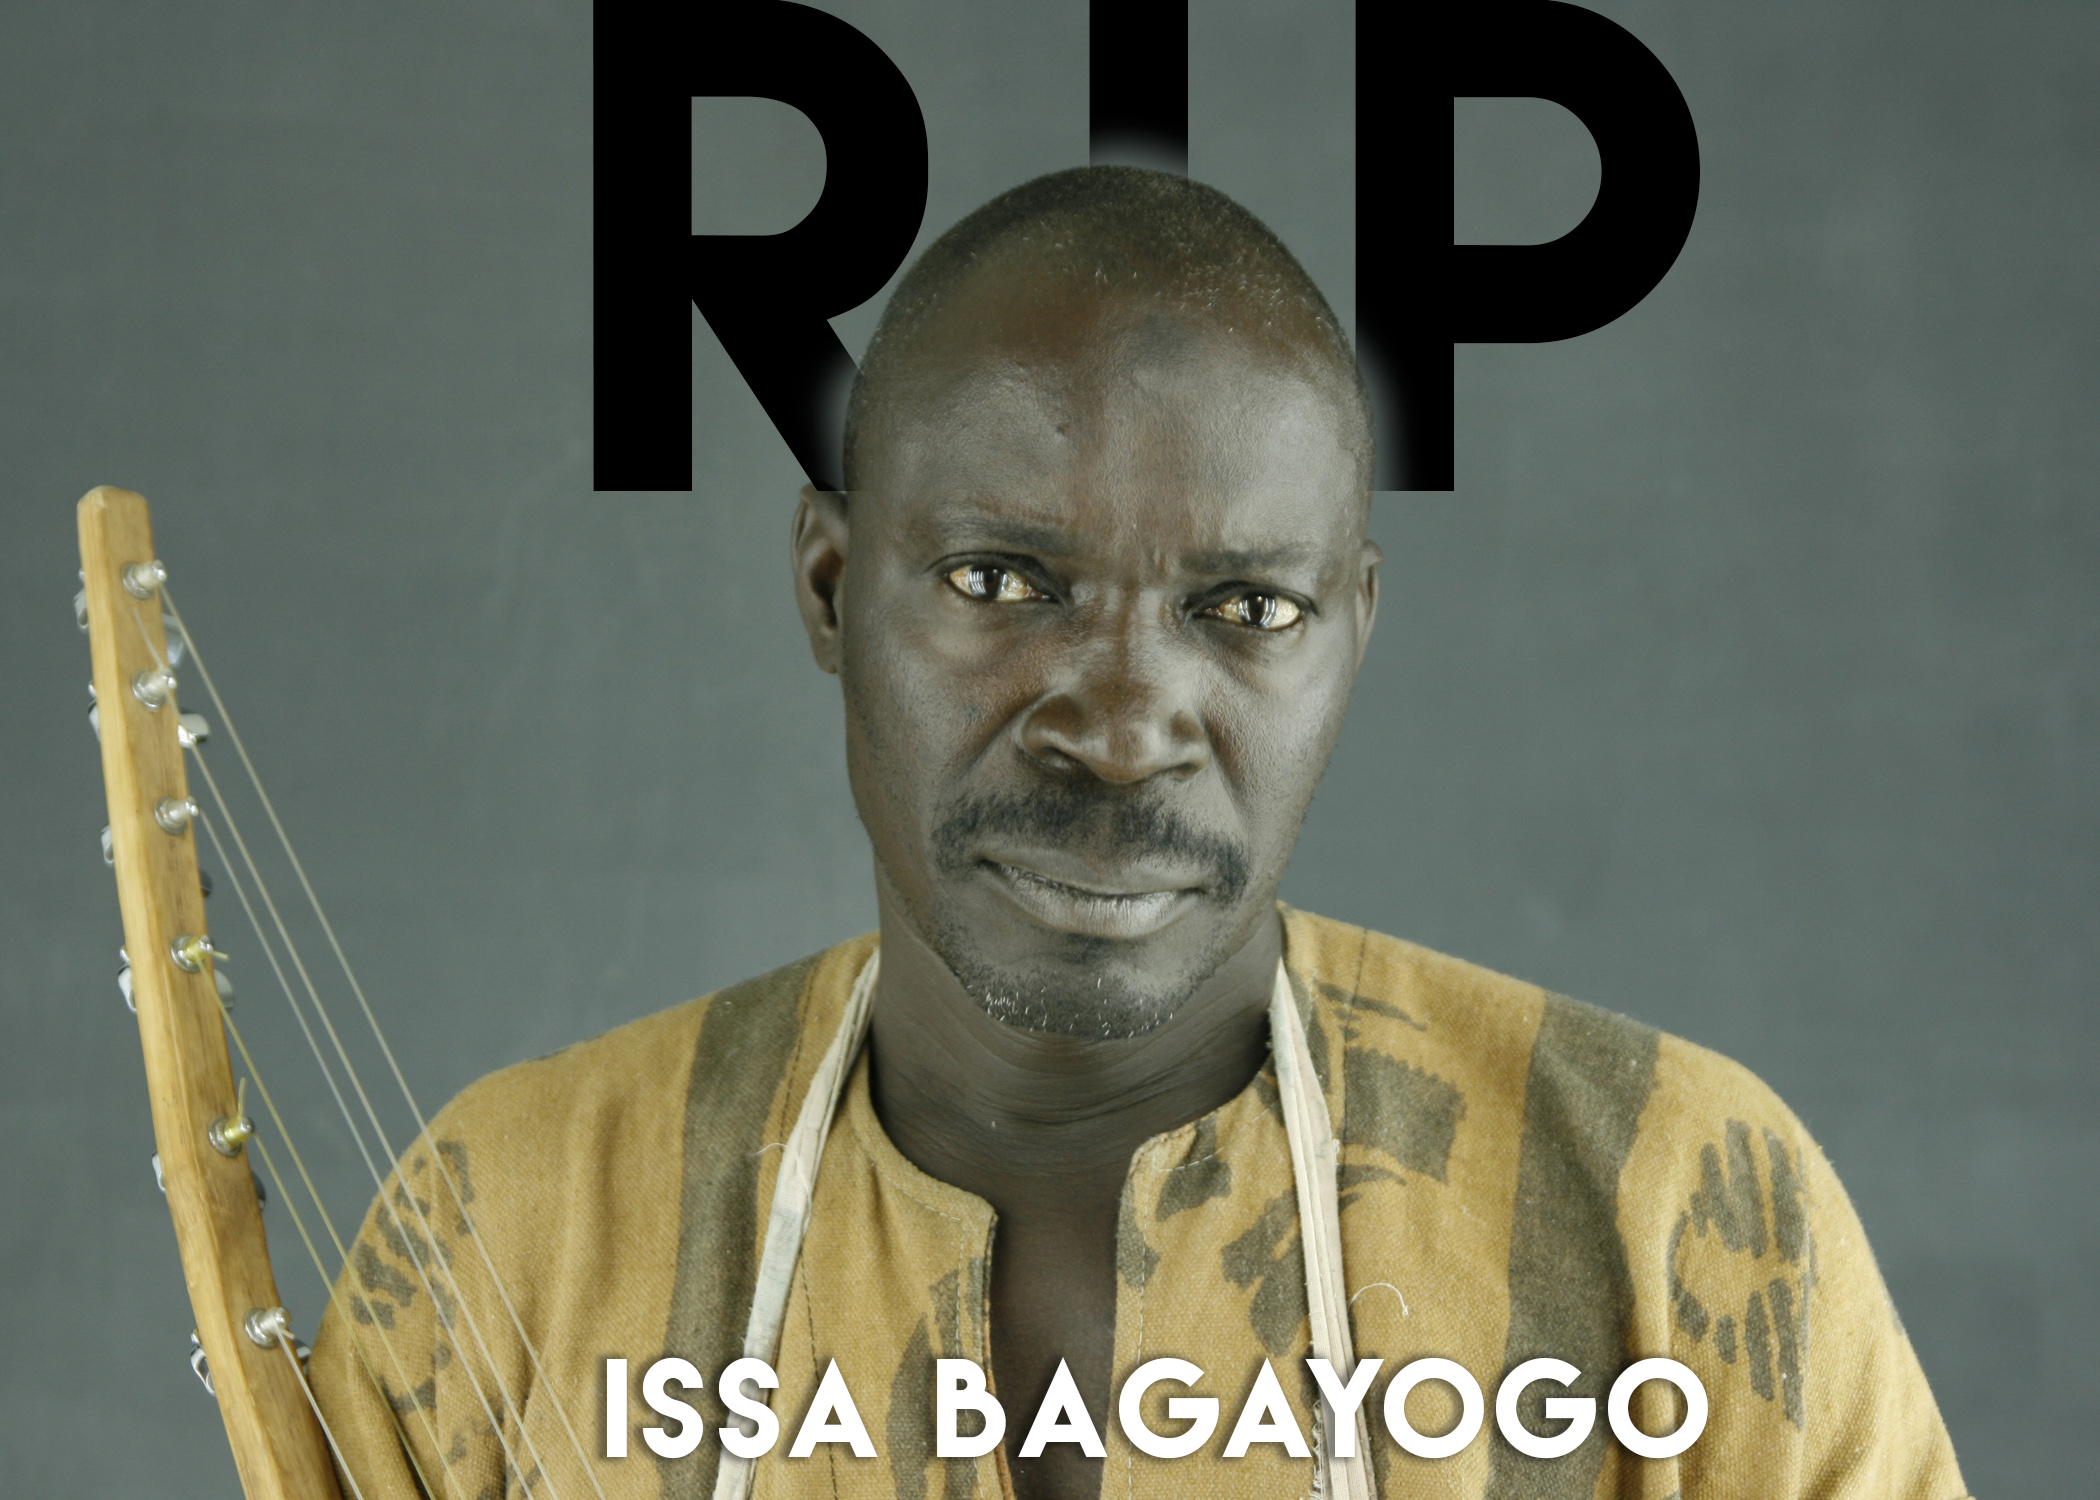 We are truly saddened to announce that Issa Bagayogo died today